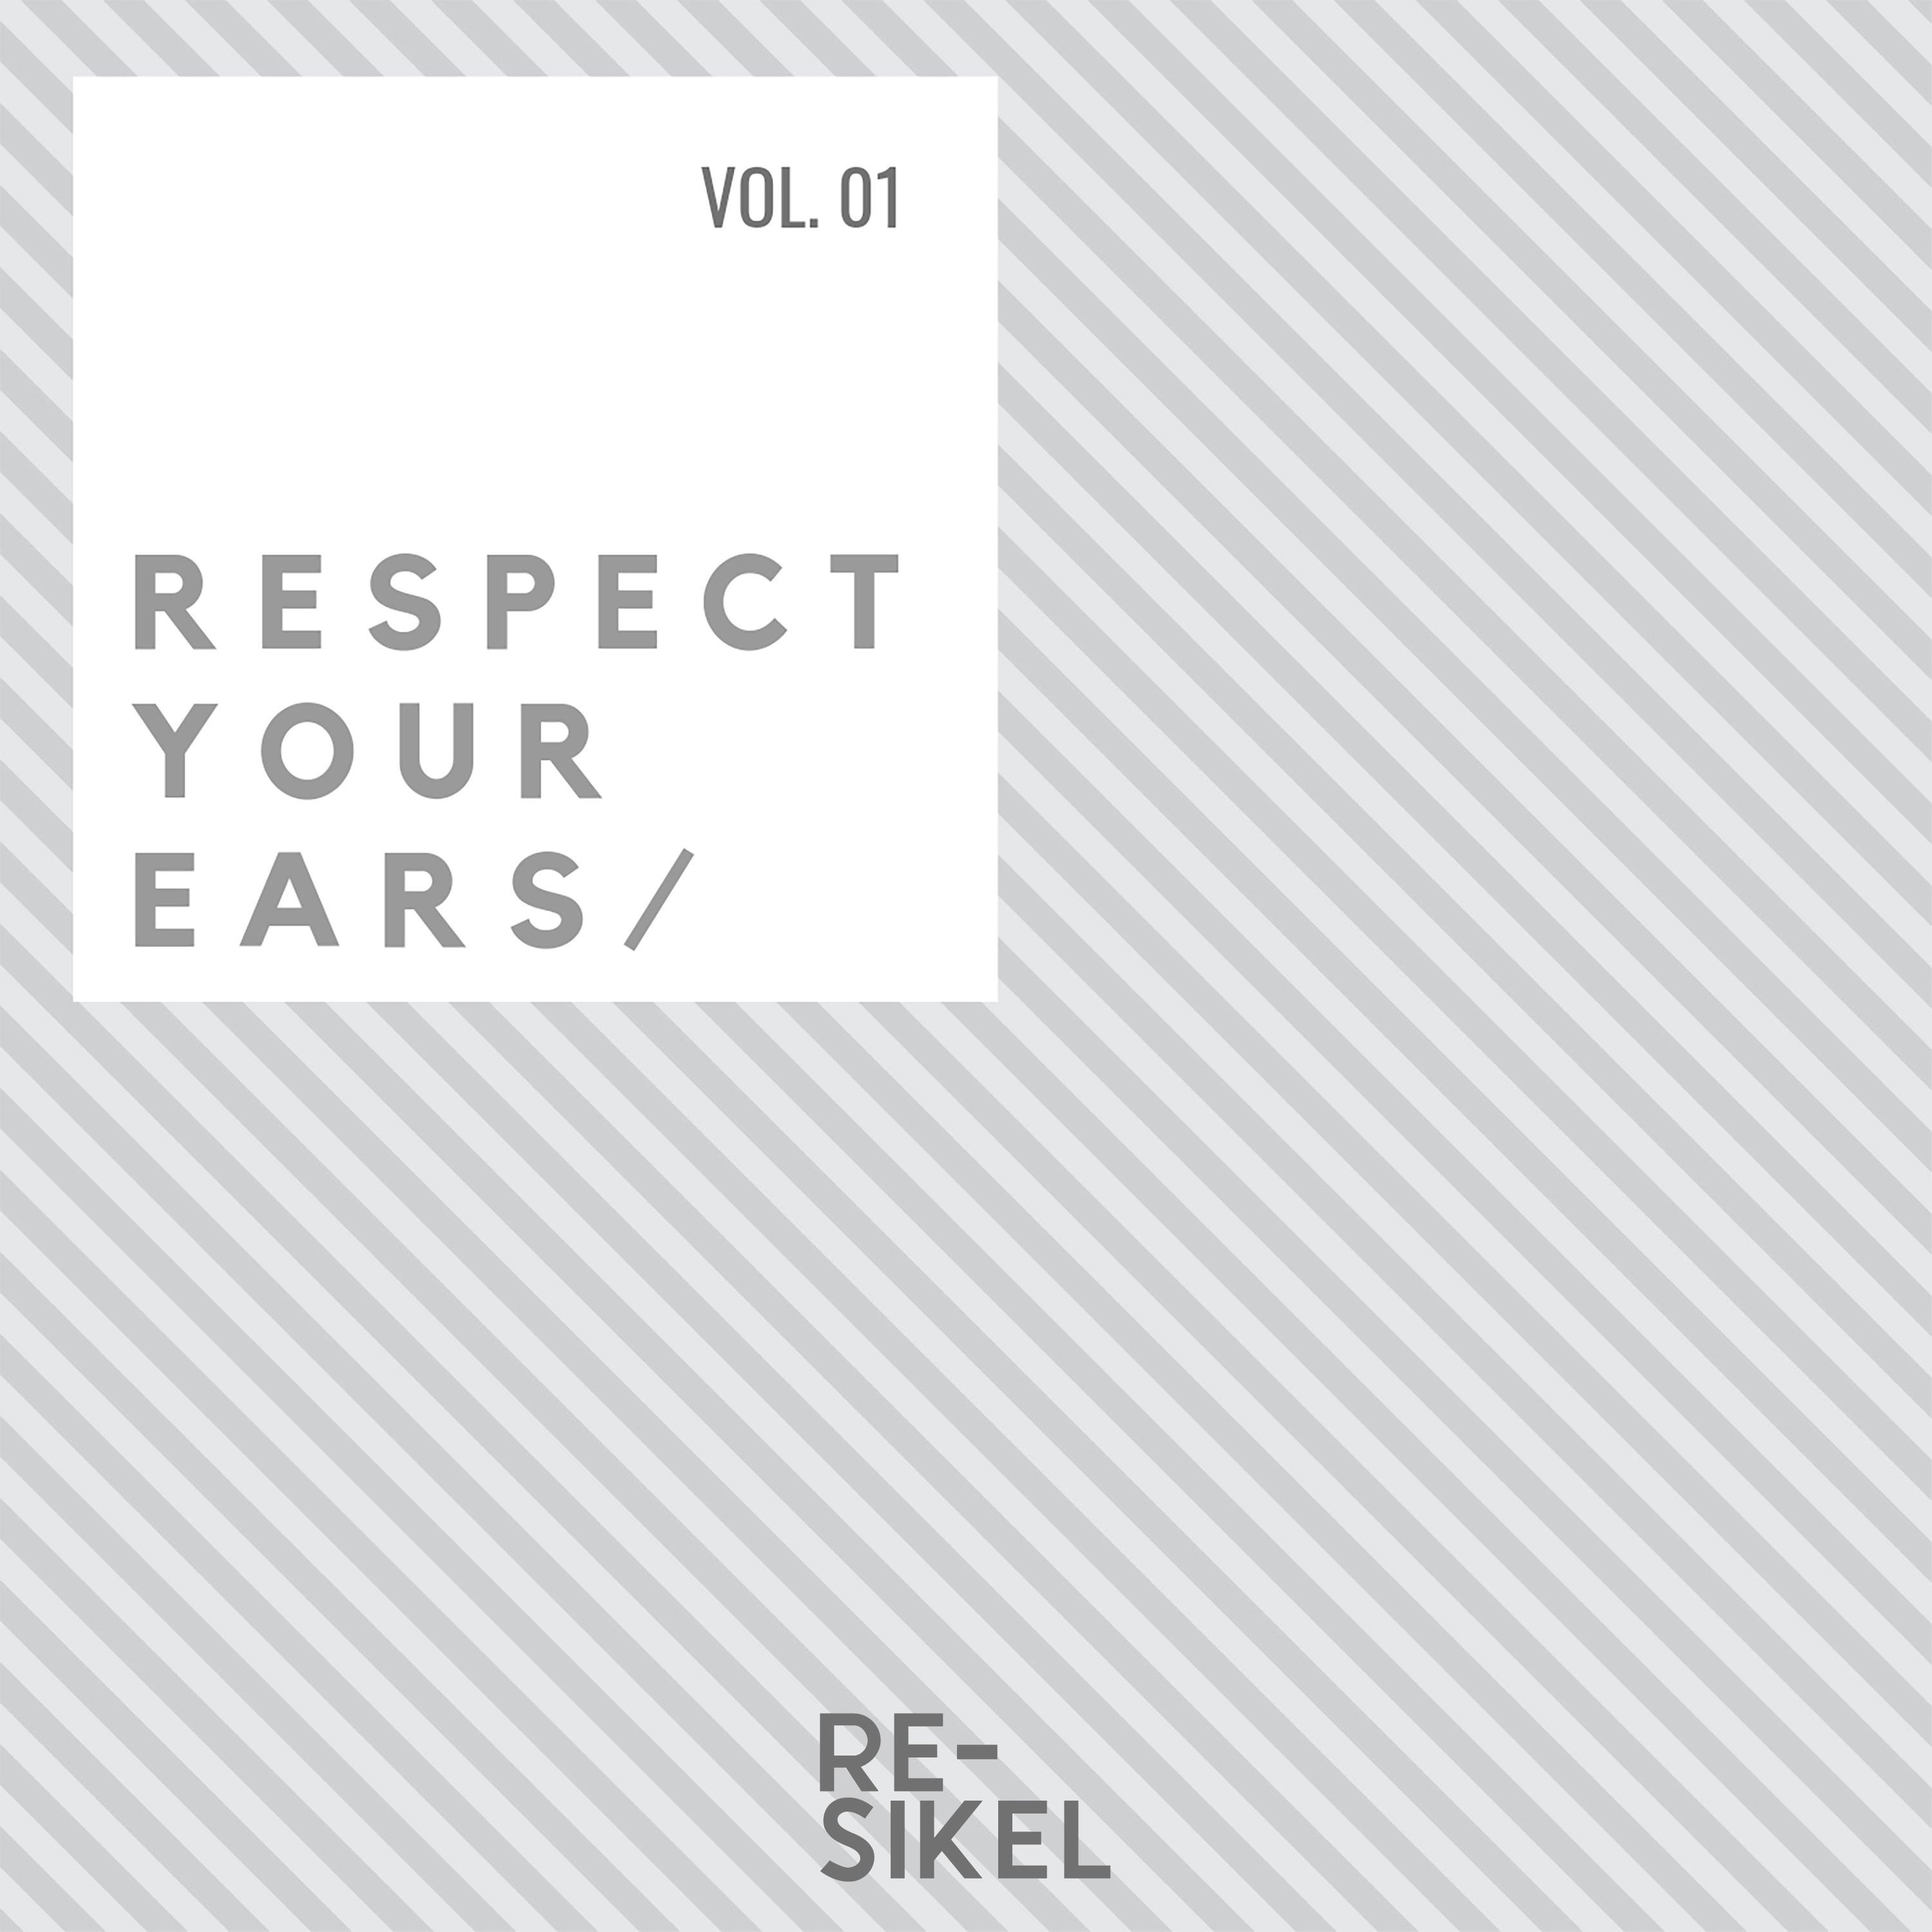 Respect Your Ears, Vol. 01